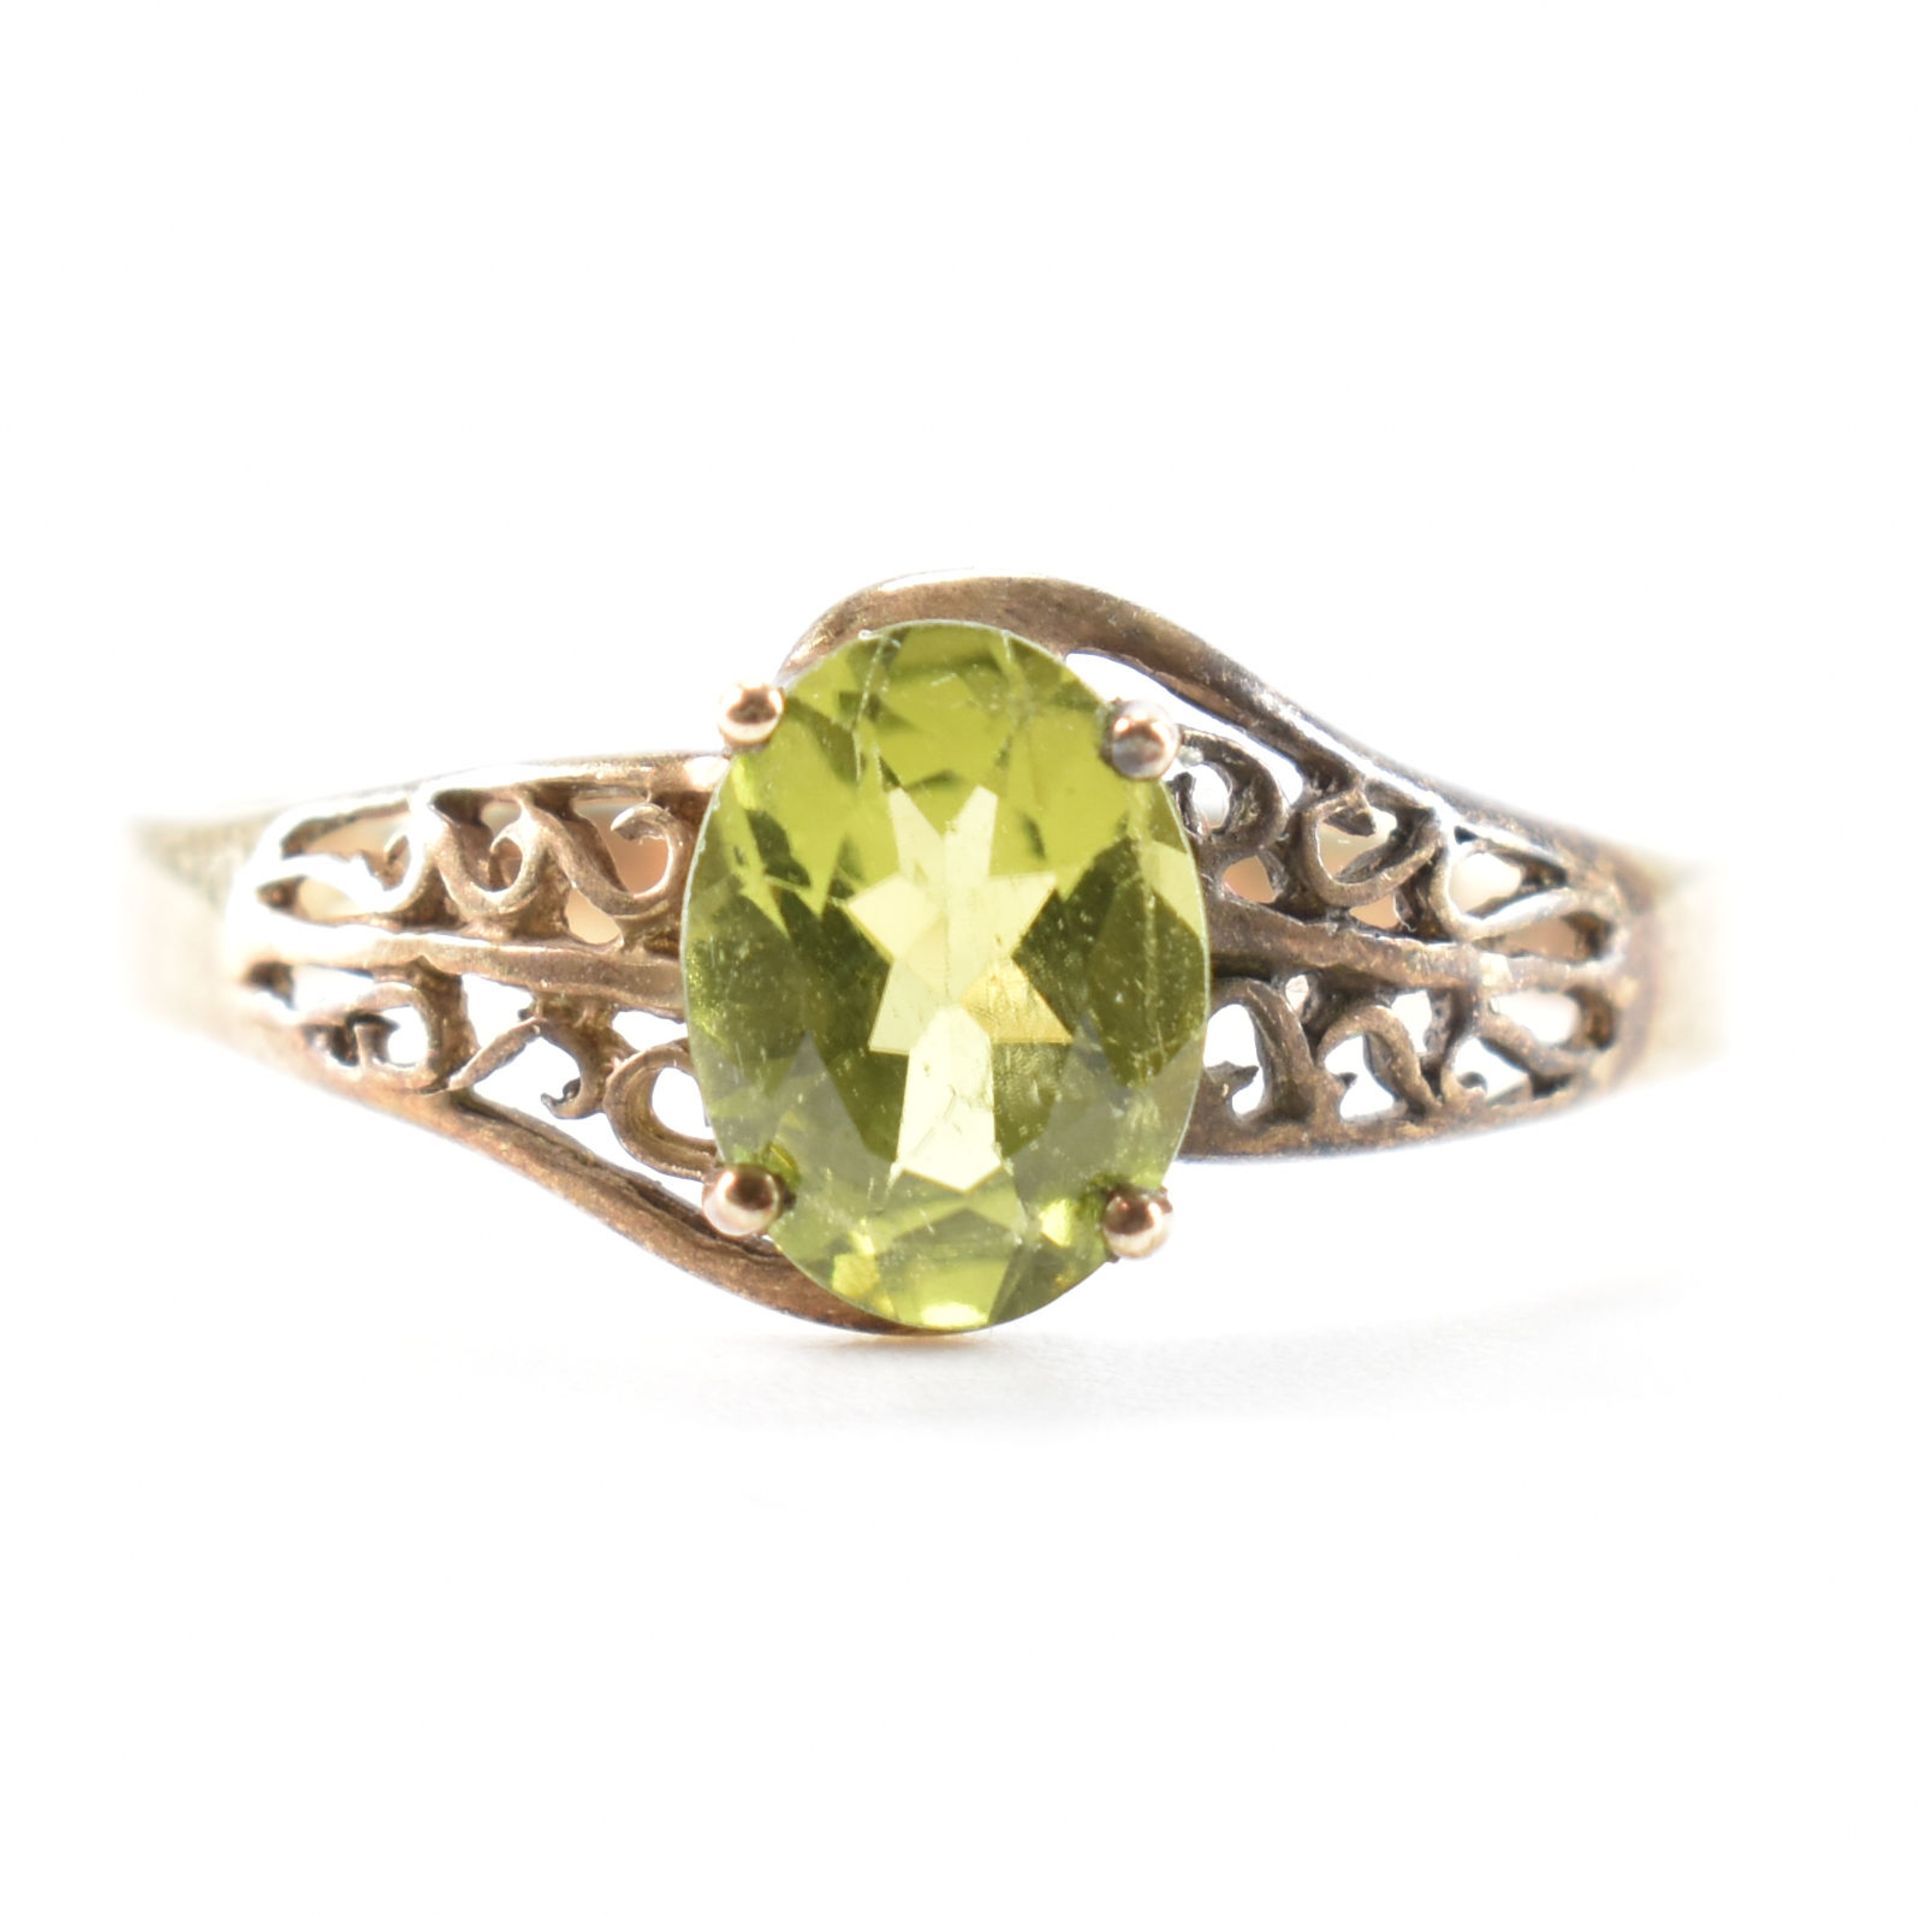 HALLMARKED 9CT GOLD & PERIDOT SOLITAIRE RING